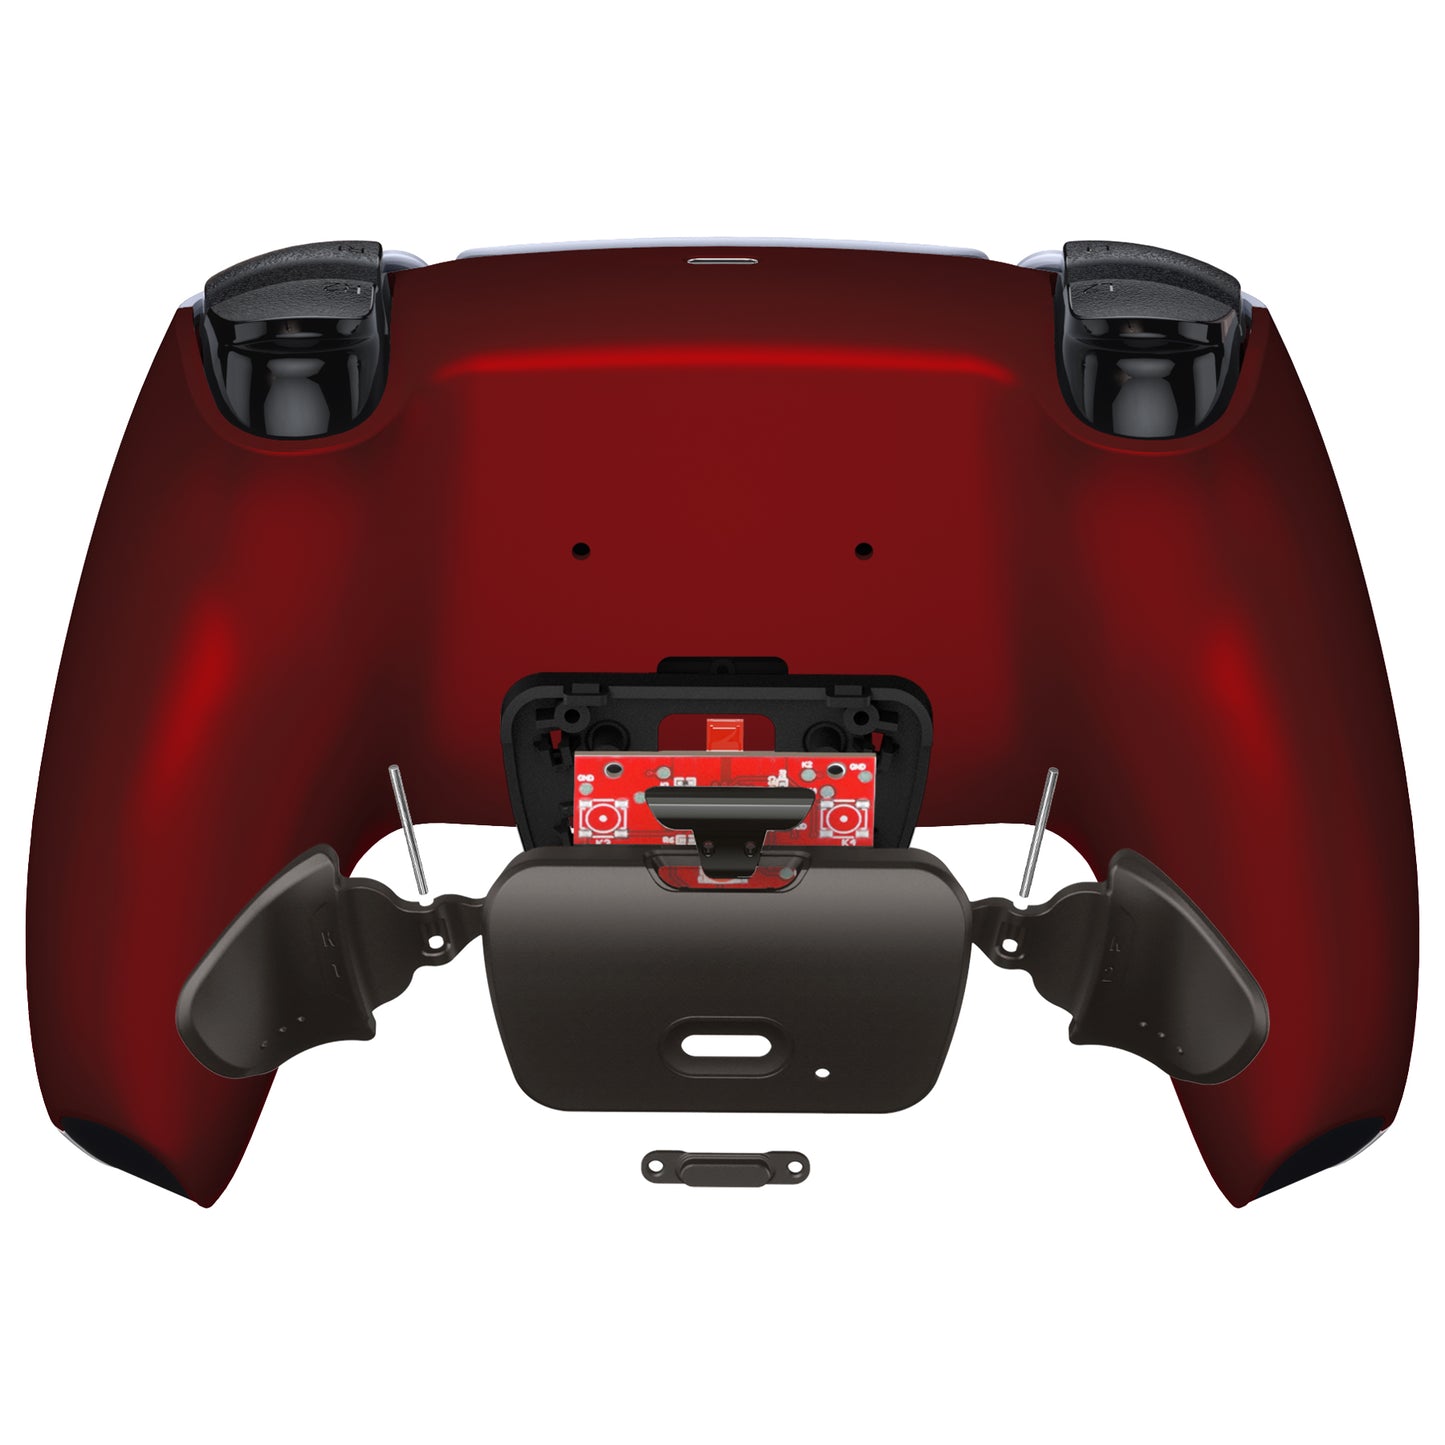 eXtremeRate Retail Black Real Metal Buttons (RMB) Version RISE Remap Kit for PS5 Controller BDM-030 with Scarlet Red Back Shell, Upgraded Remappable Back Buttons Attachment for PS5 Controller - XPFJ7004G3